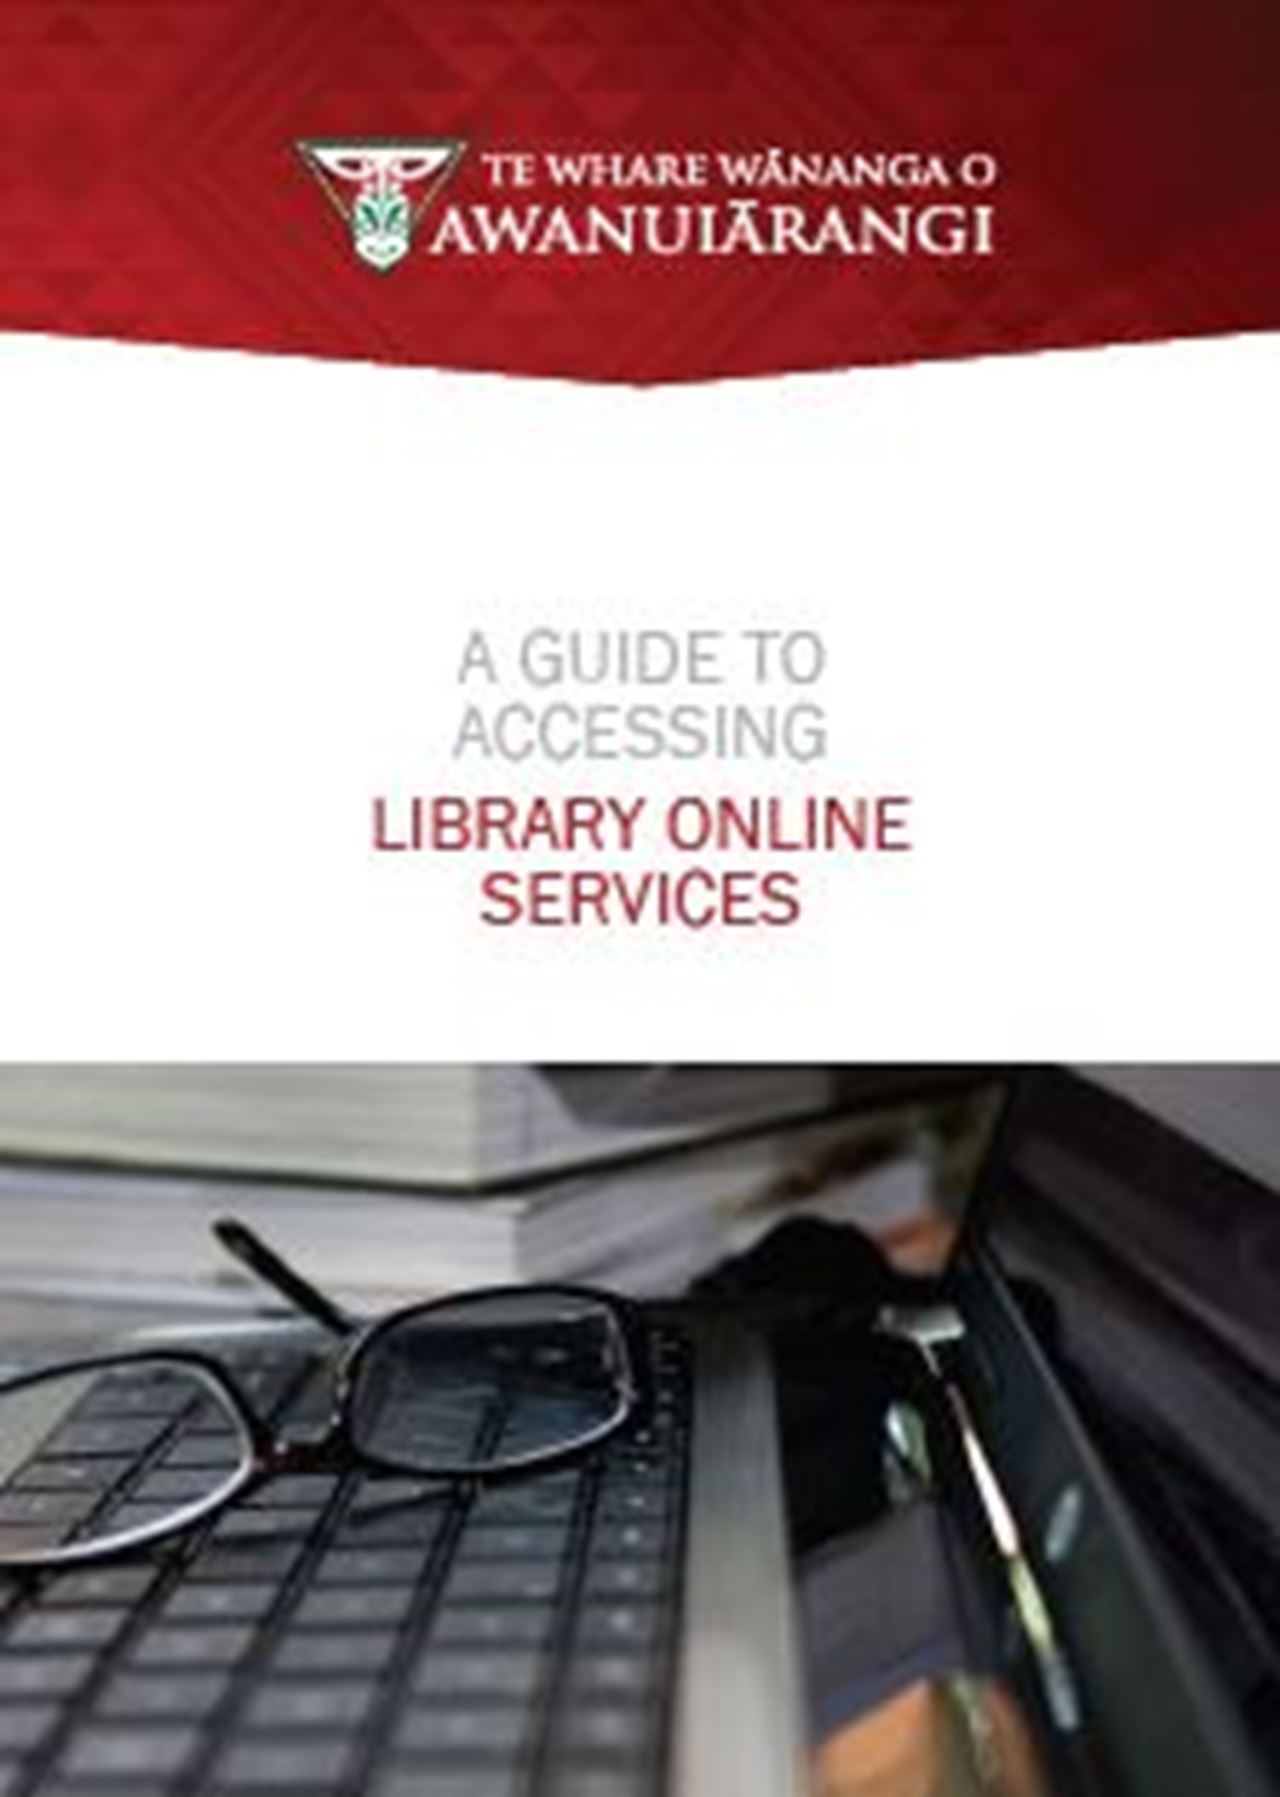 click the link to view the online services guide